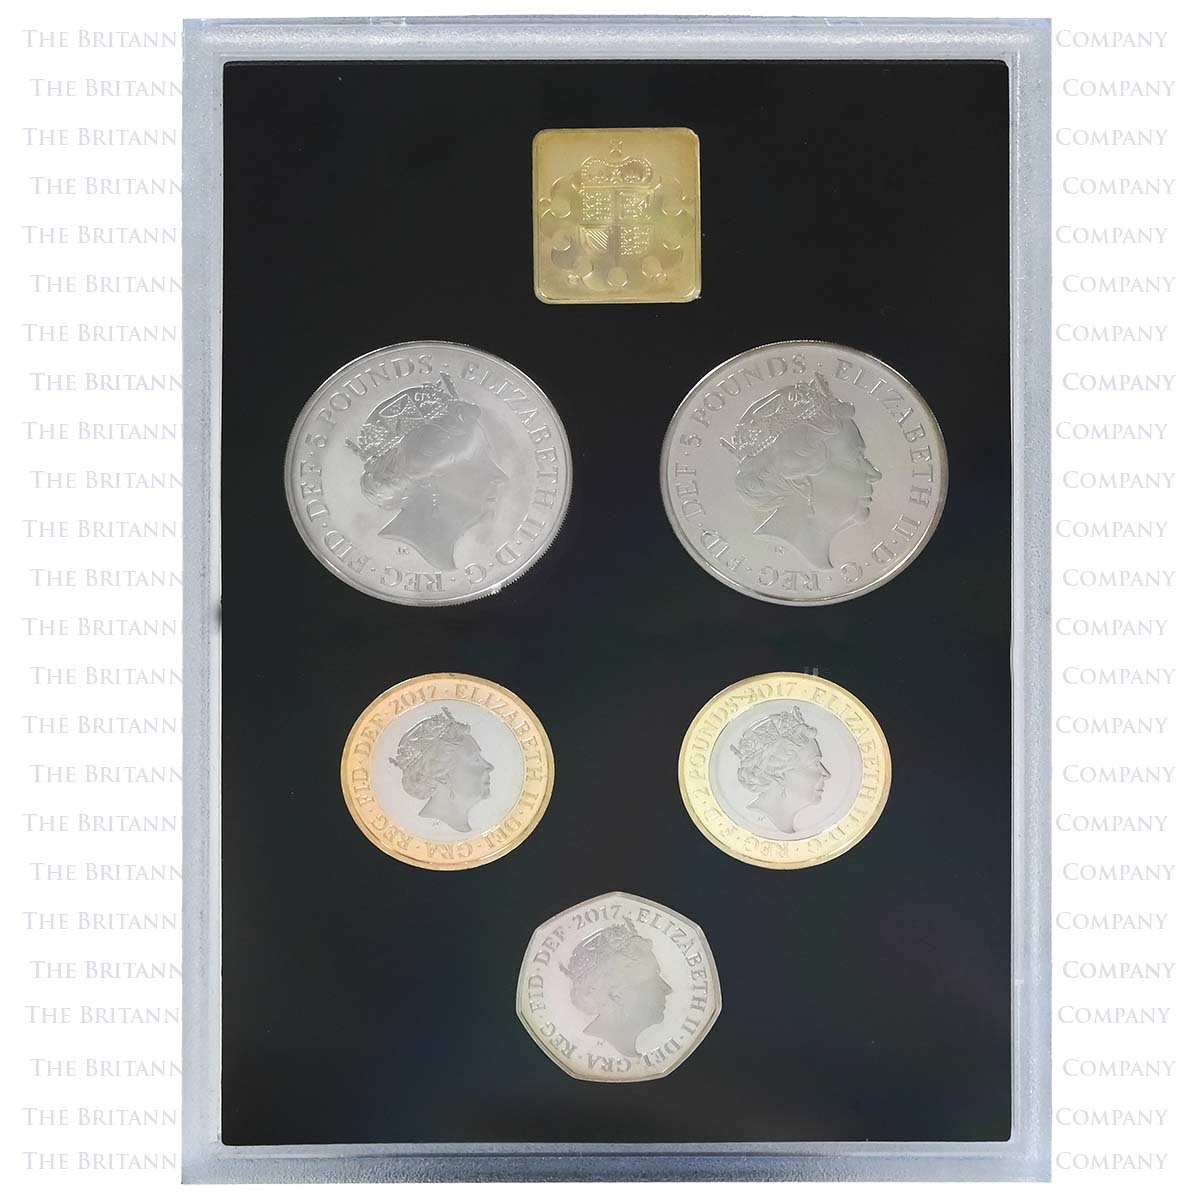 2017-proof-coin-set-collector-edtition-003-m